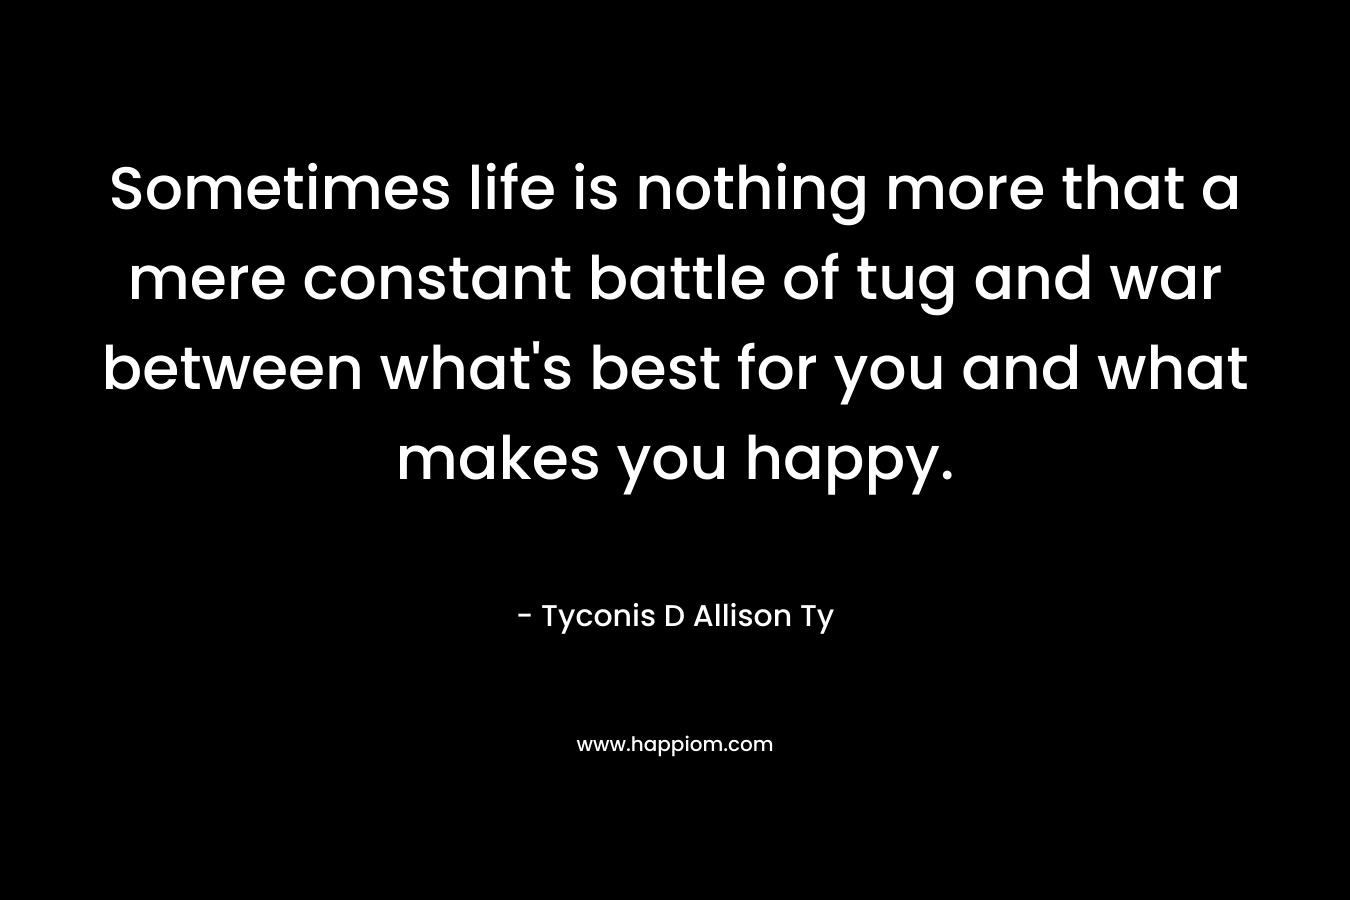 Sometimes life is nothing more that a mere constant battle of tug and war between what's best for you and what makes you happy.